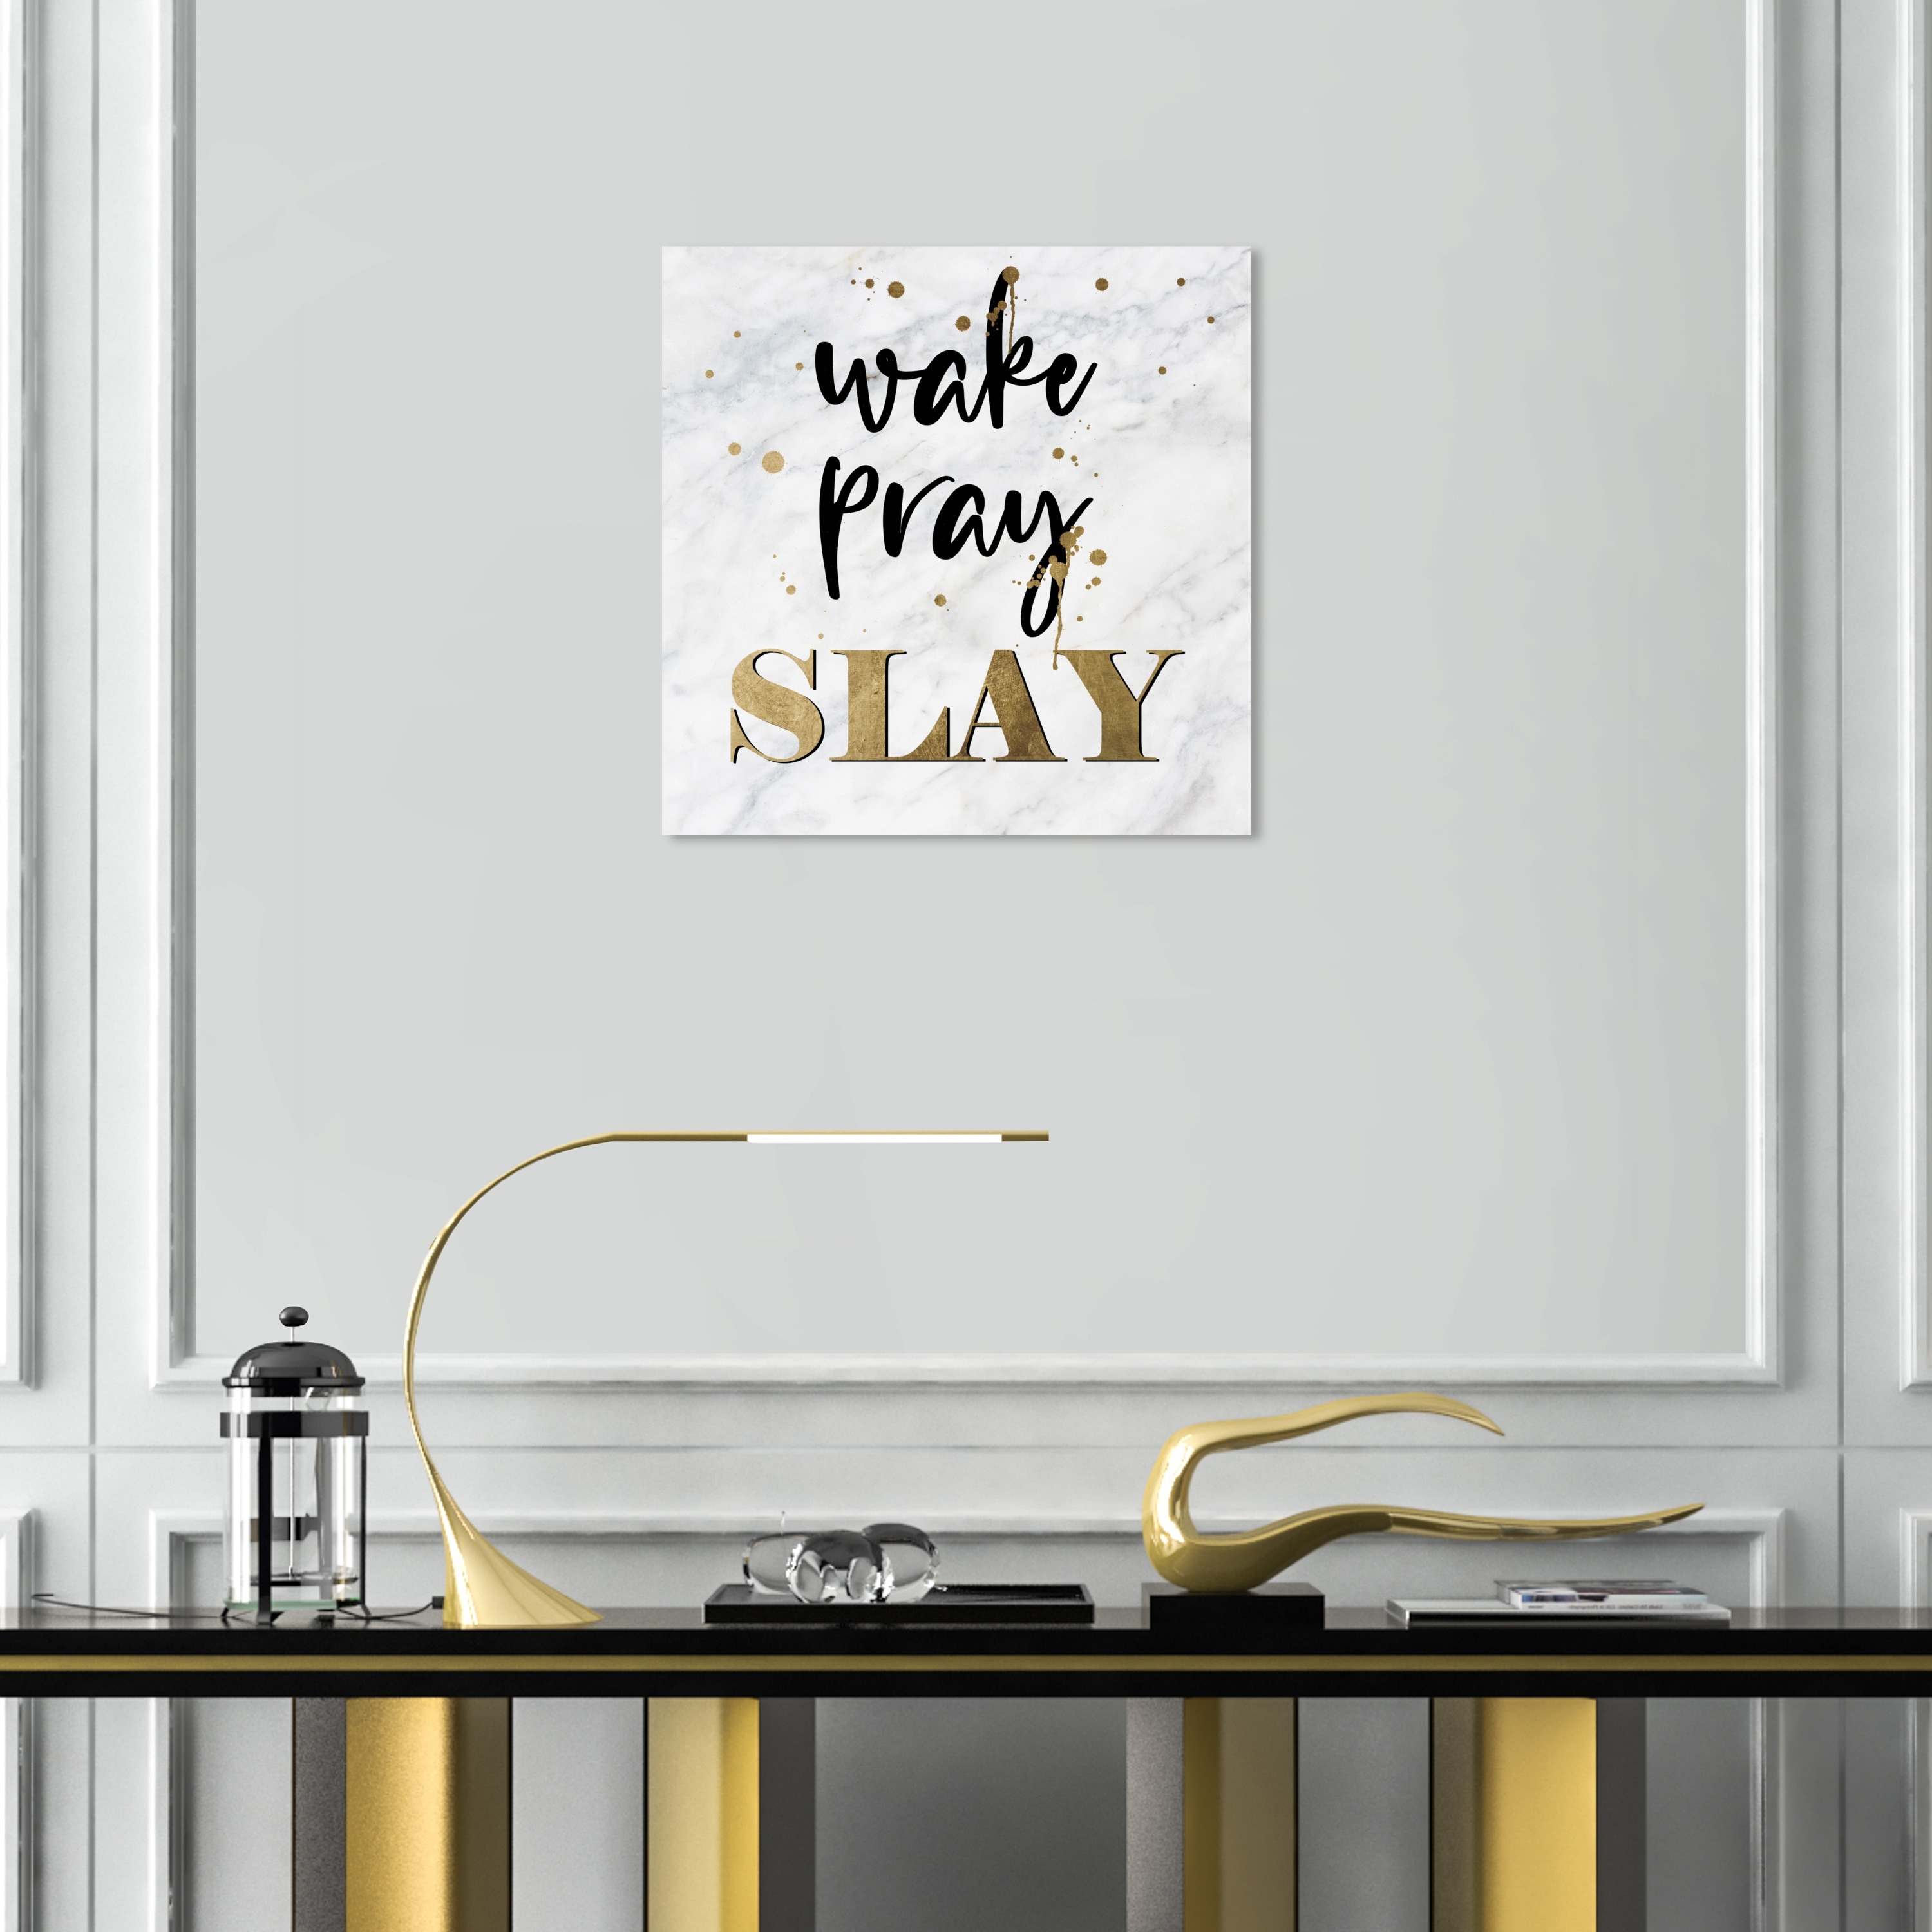 Oliver Gal 'More Gold Letters' Typography and Quotes Wall Art